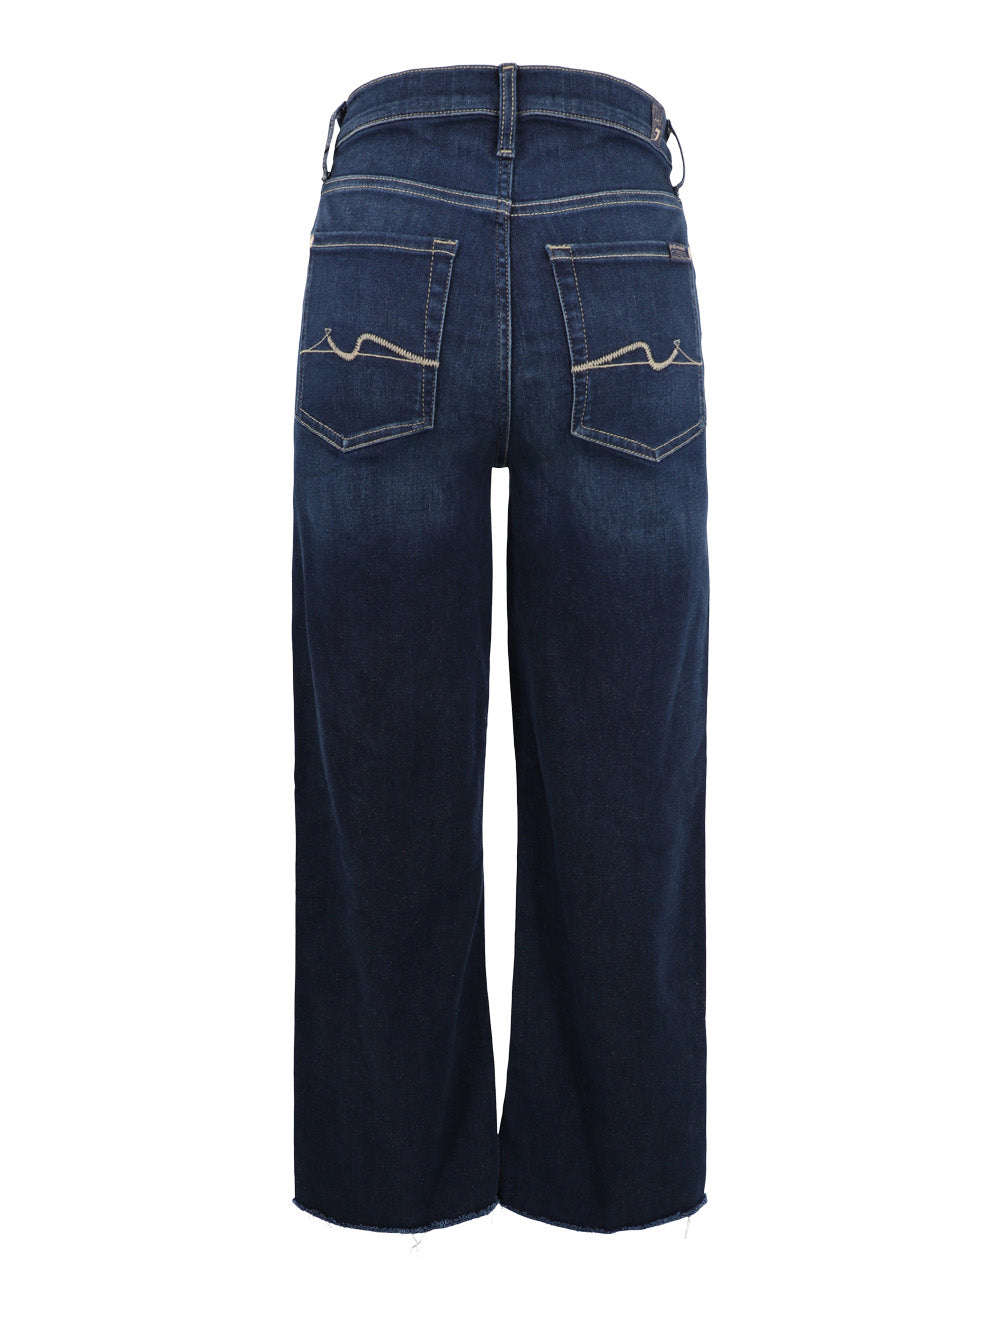 7 For All Mankind Cropped Alexa Jeans in Diane